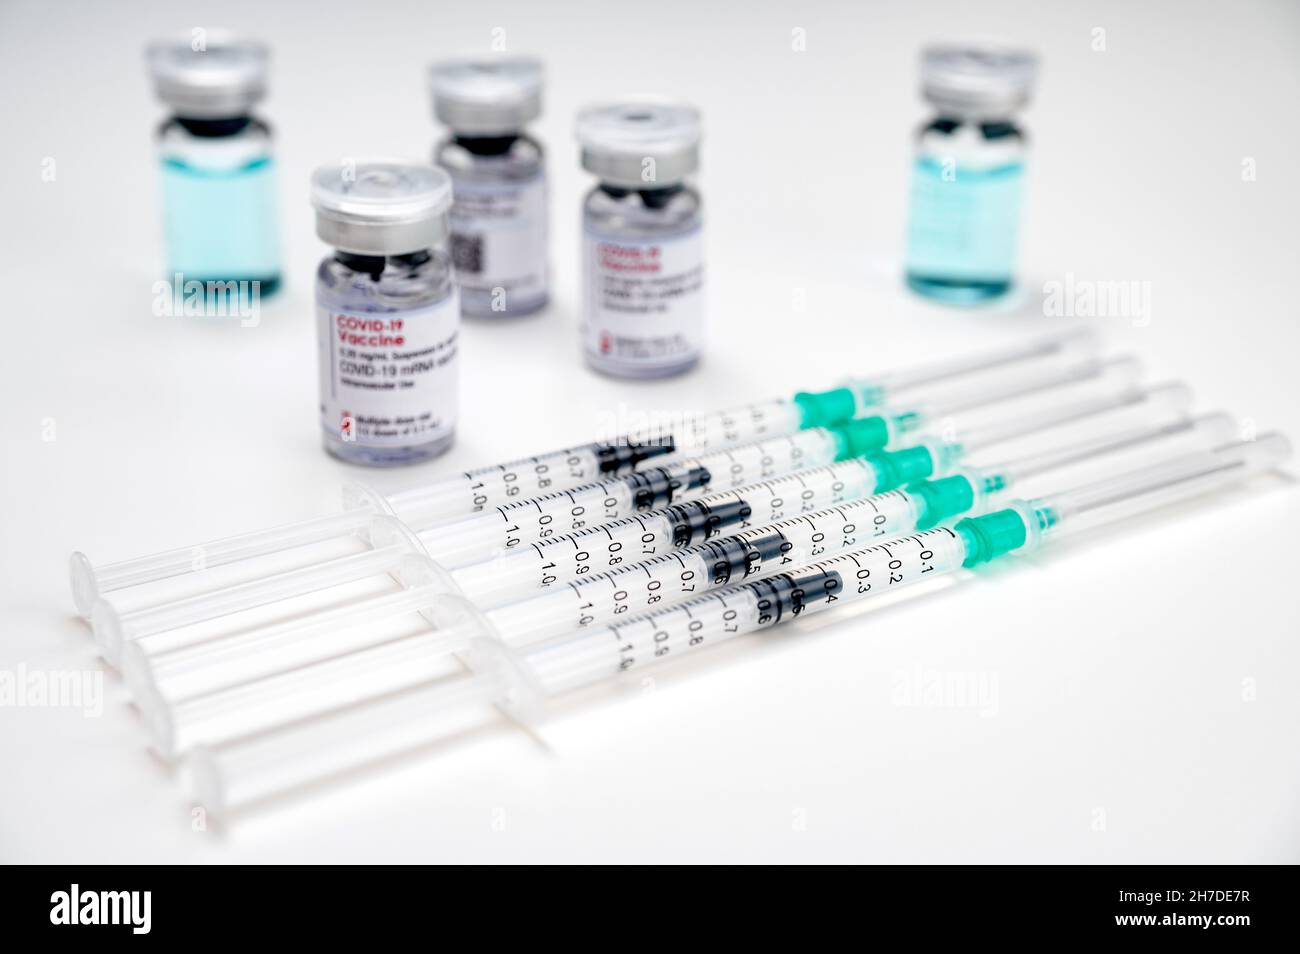 Coronavirus vaccination against SARS-CoV-2 – medical syringes with COVID-19 vaccine and different glass vials in the background. Stock Photo